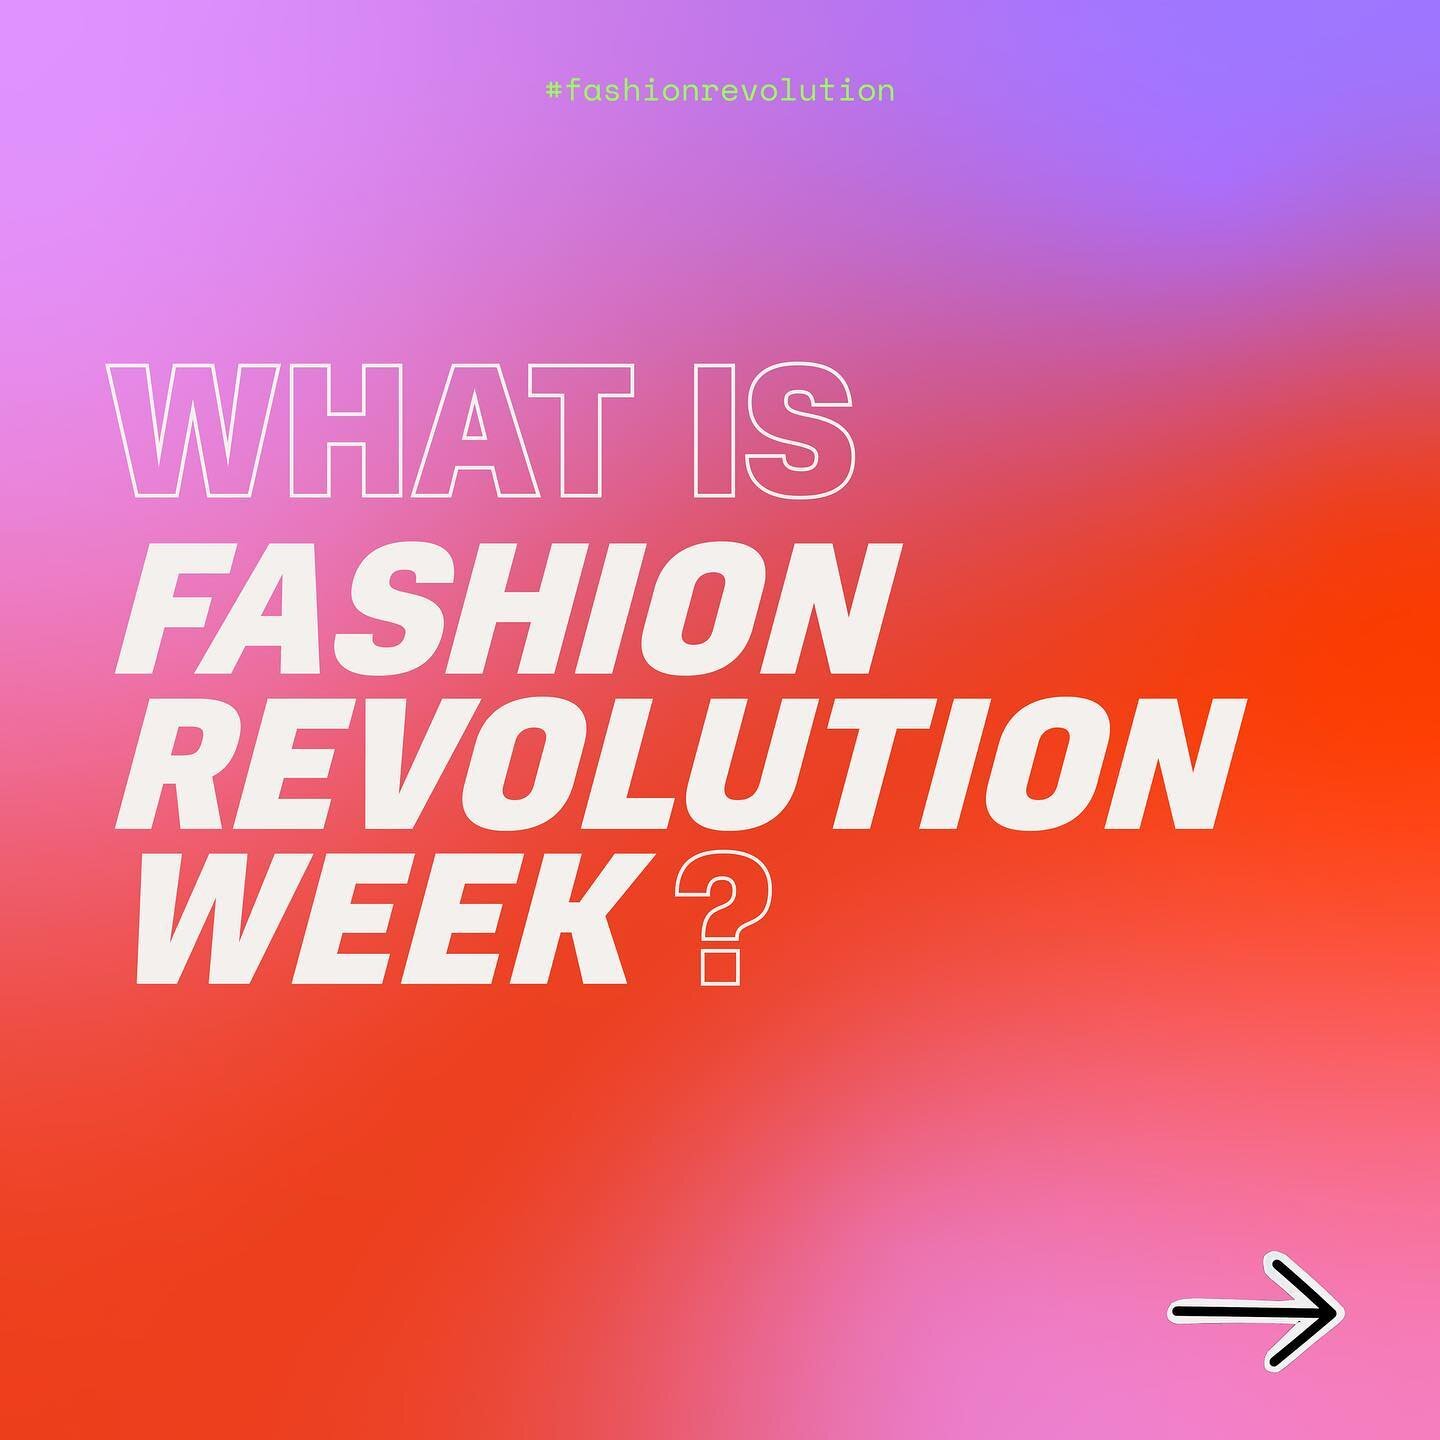 It&rsquo;s Fashion Revolution Week! Fashion Production is harmful for people and the planet on many levels. The annual campaign is spotlighting the dark sides and shines a light on solutions and ideas forming a better fashion industry of tomorrow. 

